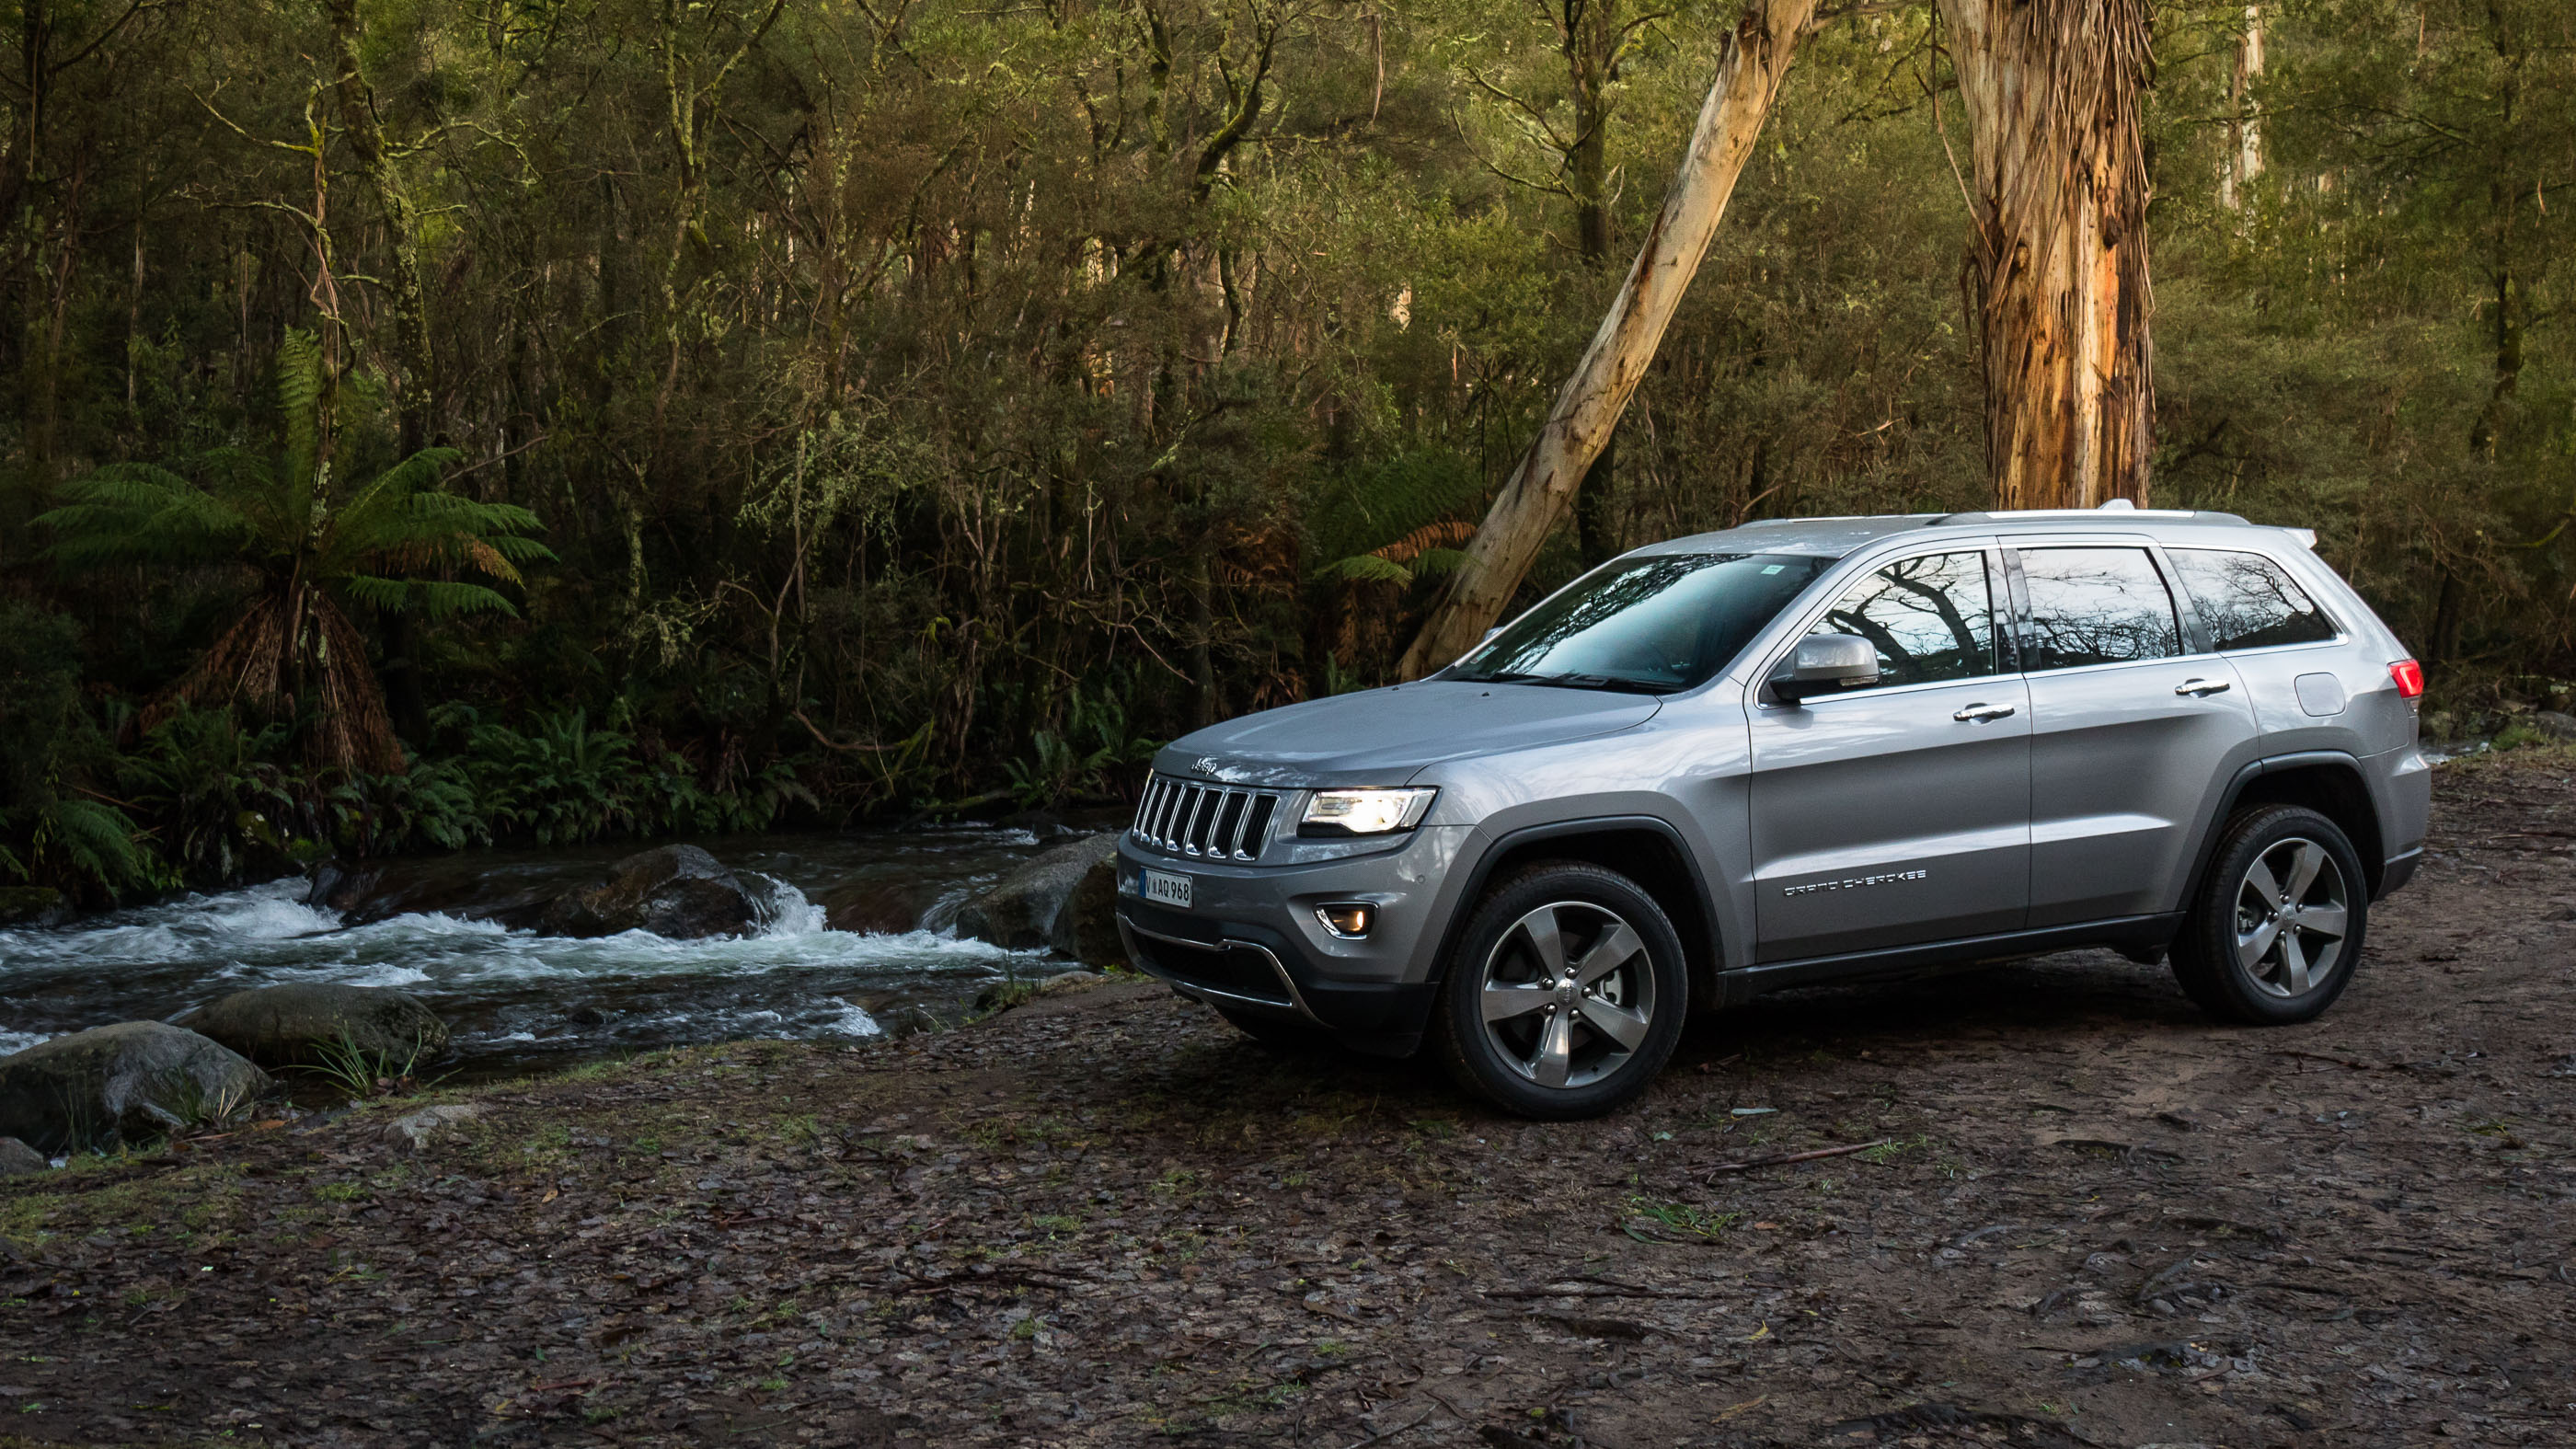 2016 Jeep Grand Cherokee Limited Diesel Review | CarAdvice